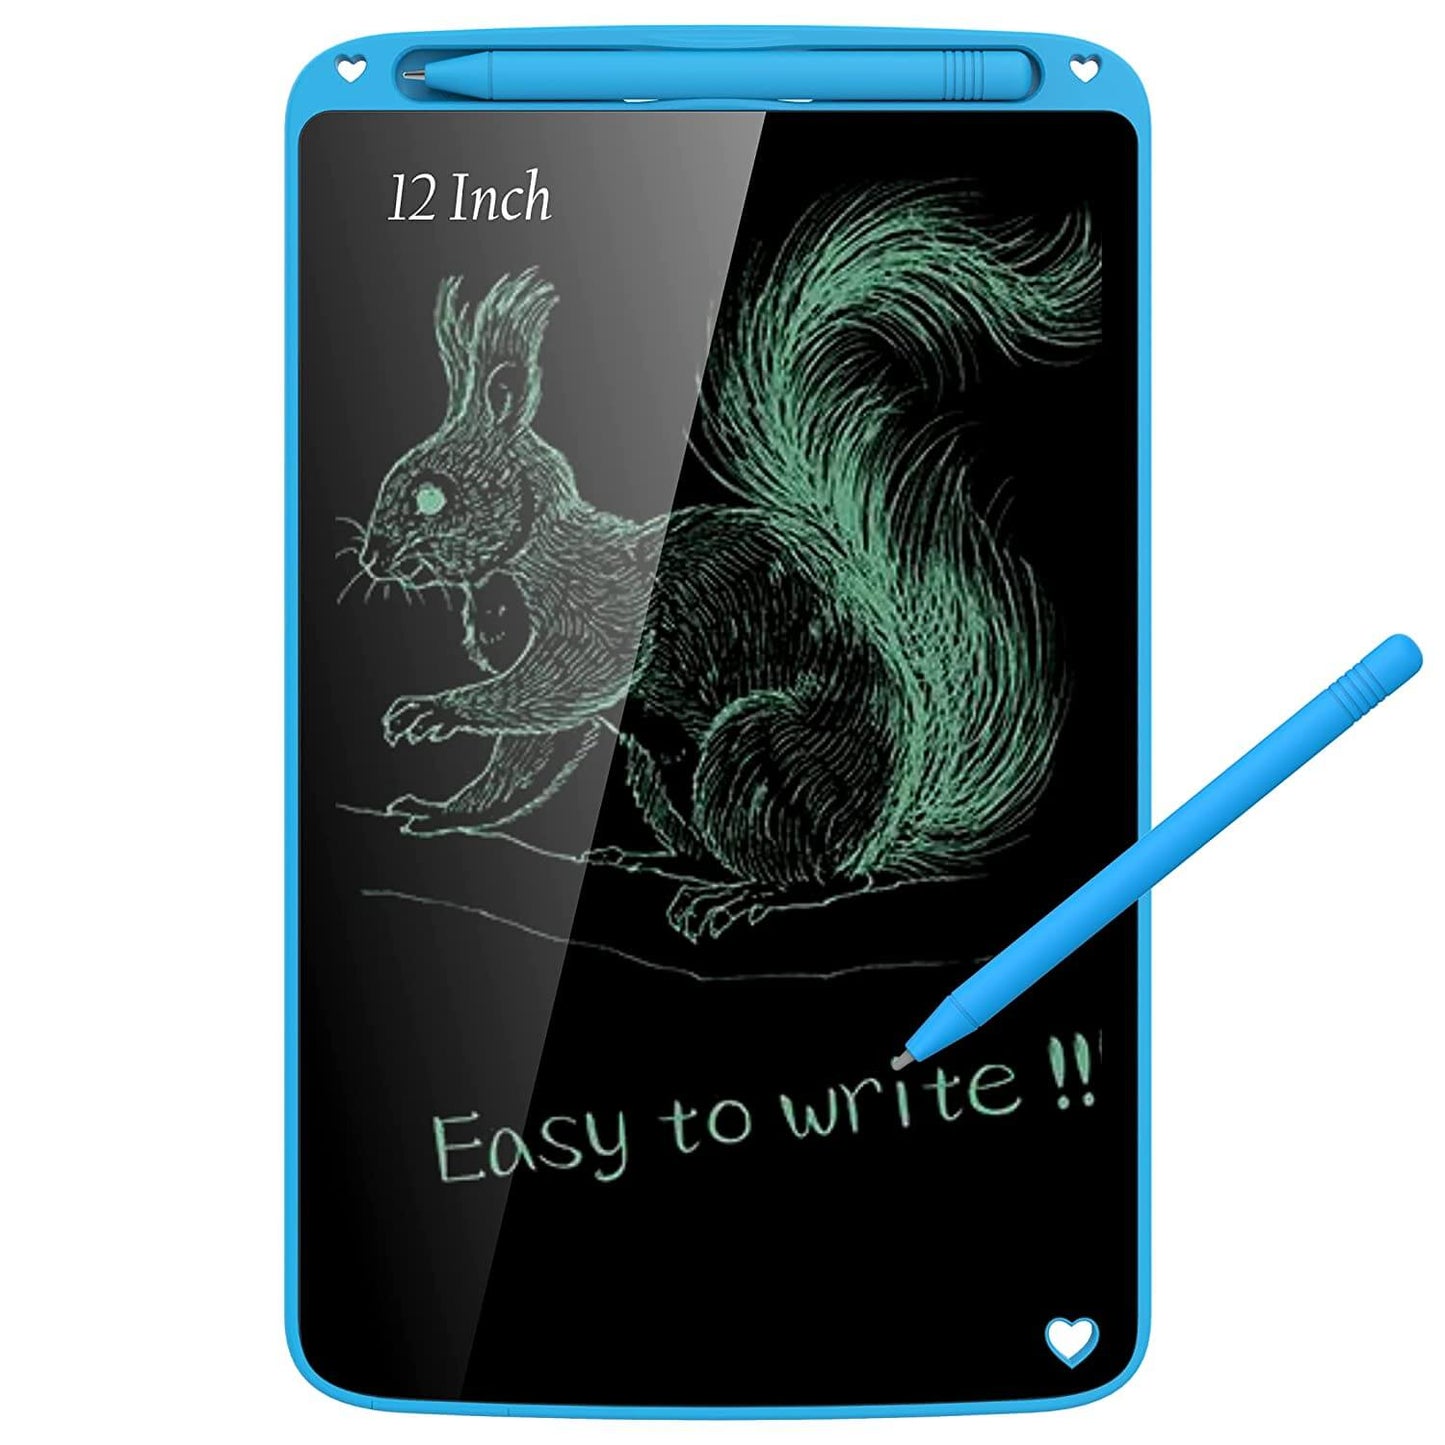 12 Inches LCD WritingTablet/Drawing Board/Doodle Board/Writing Pad with- Reusable Portable E Writer Educational Toys For Kids, Student & Teachers